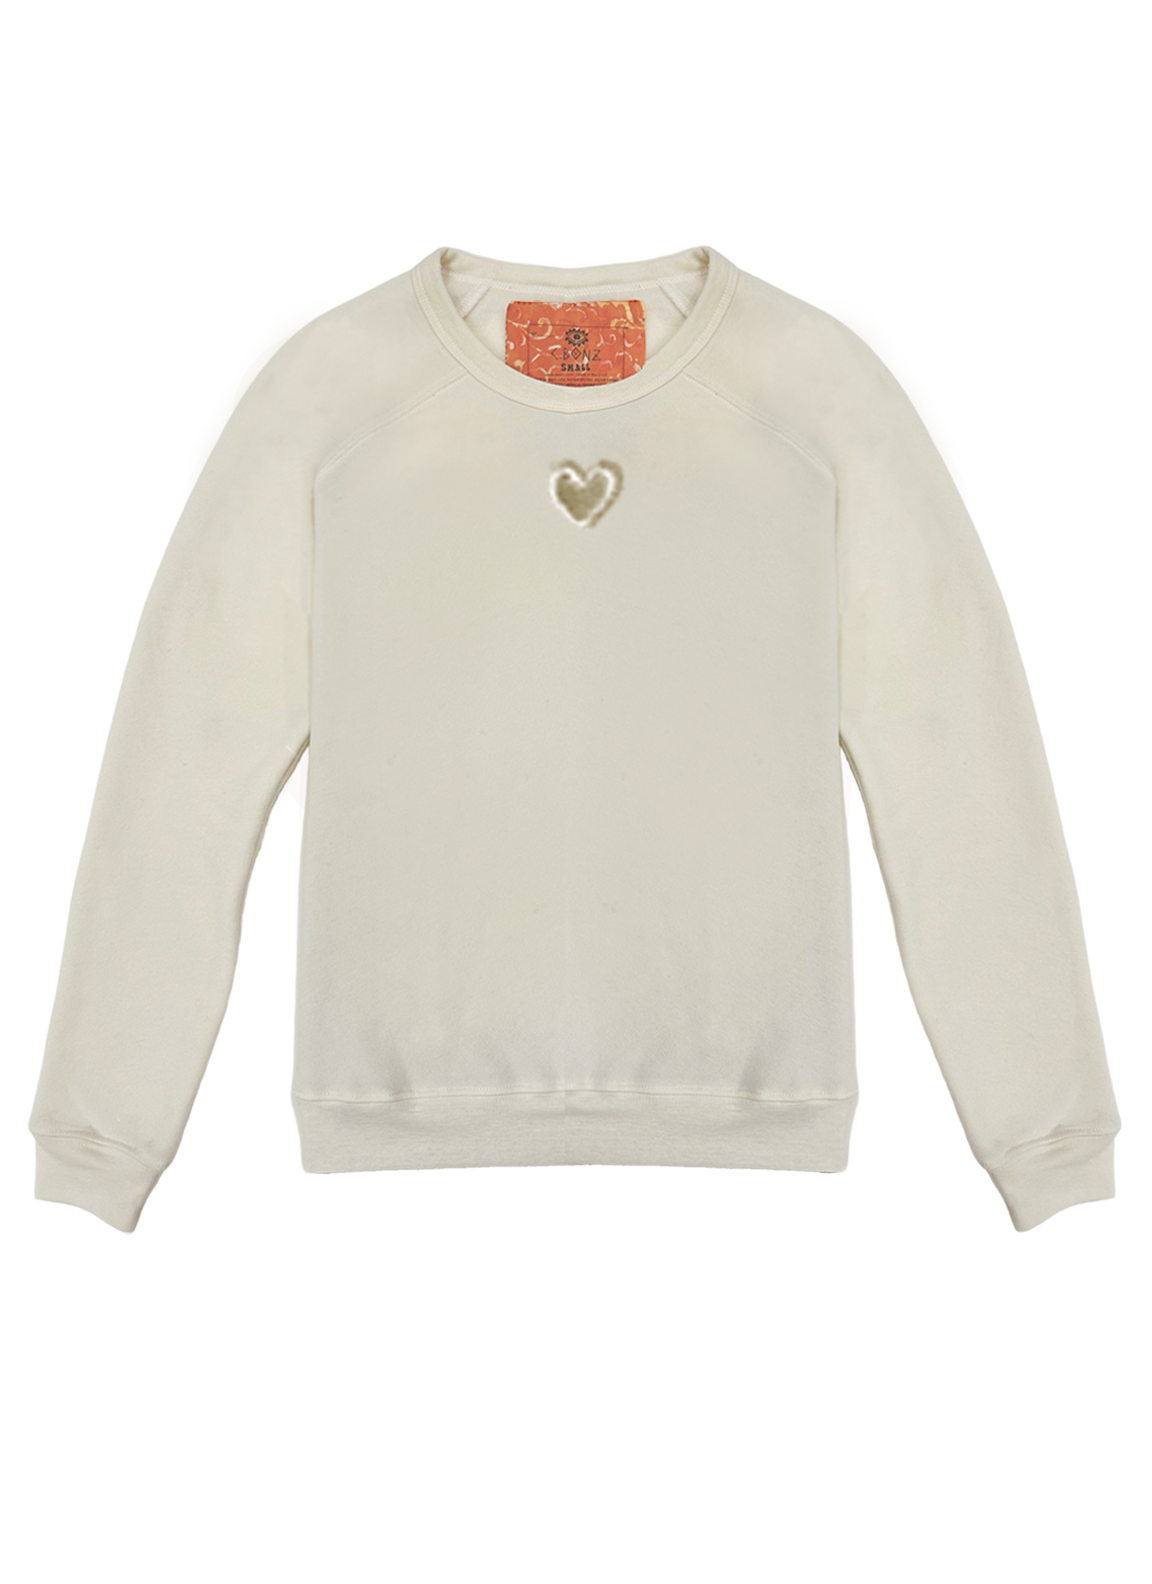 HUPOM Womens White Sweatshirt Crew Neck Flap Cocktail & Party